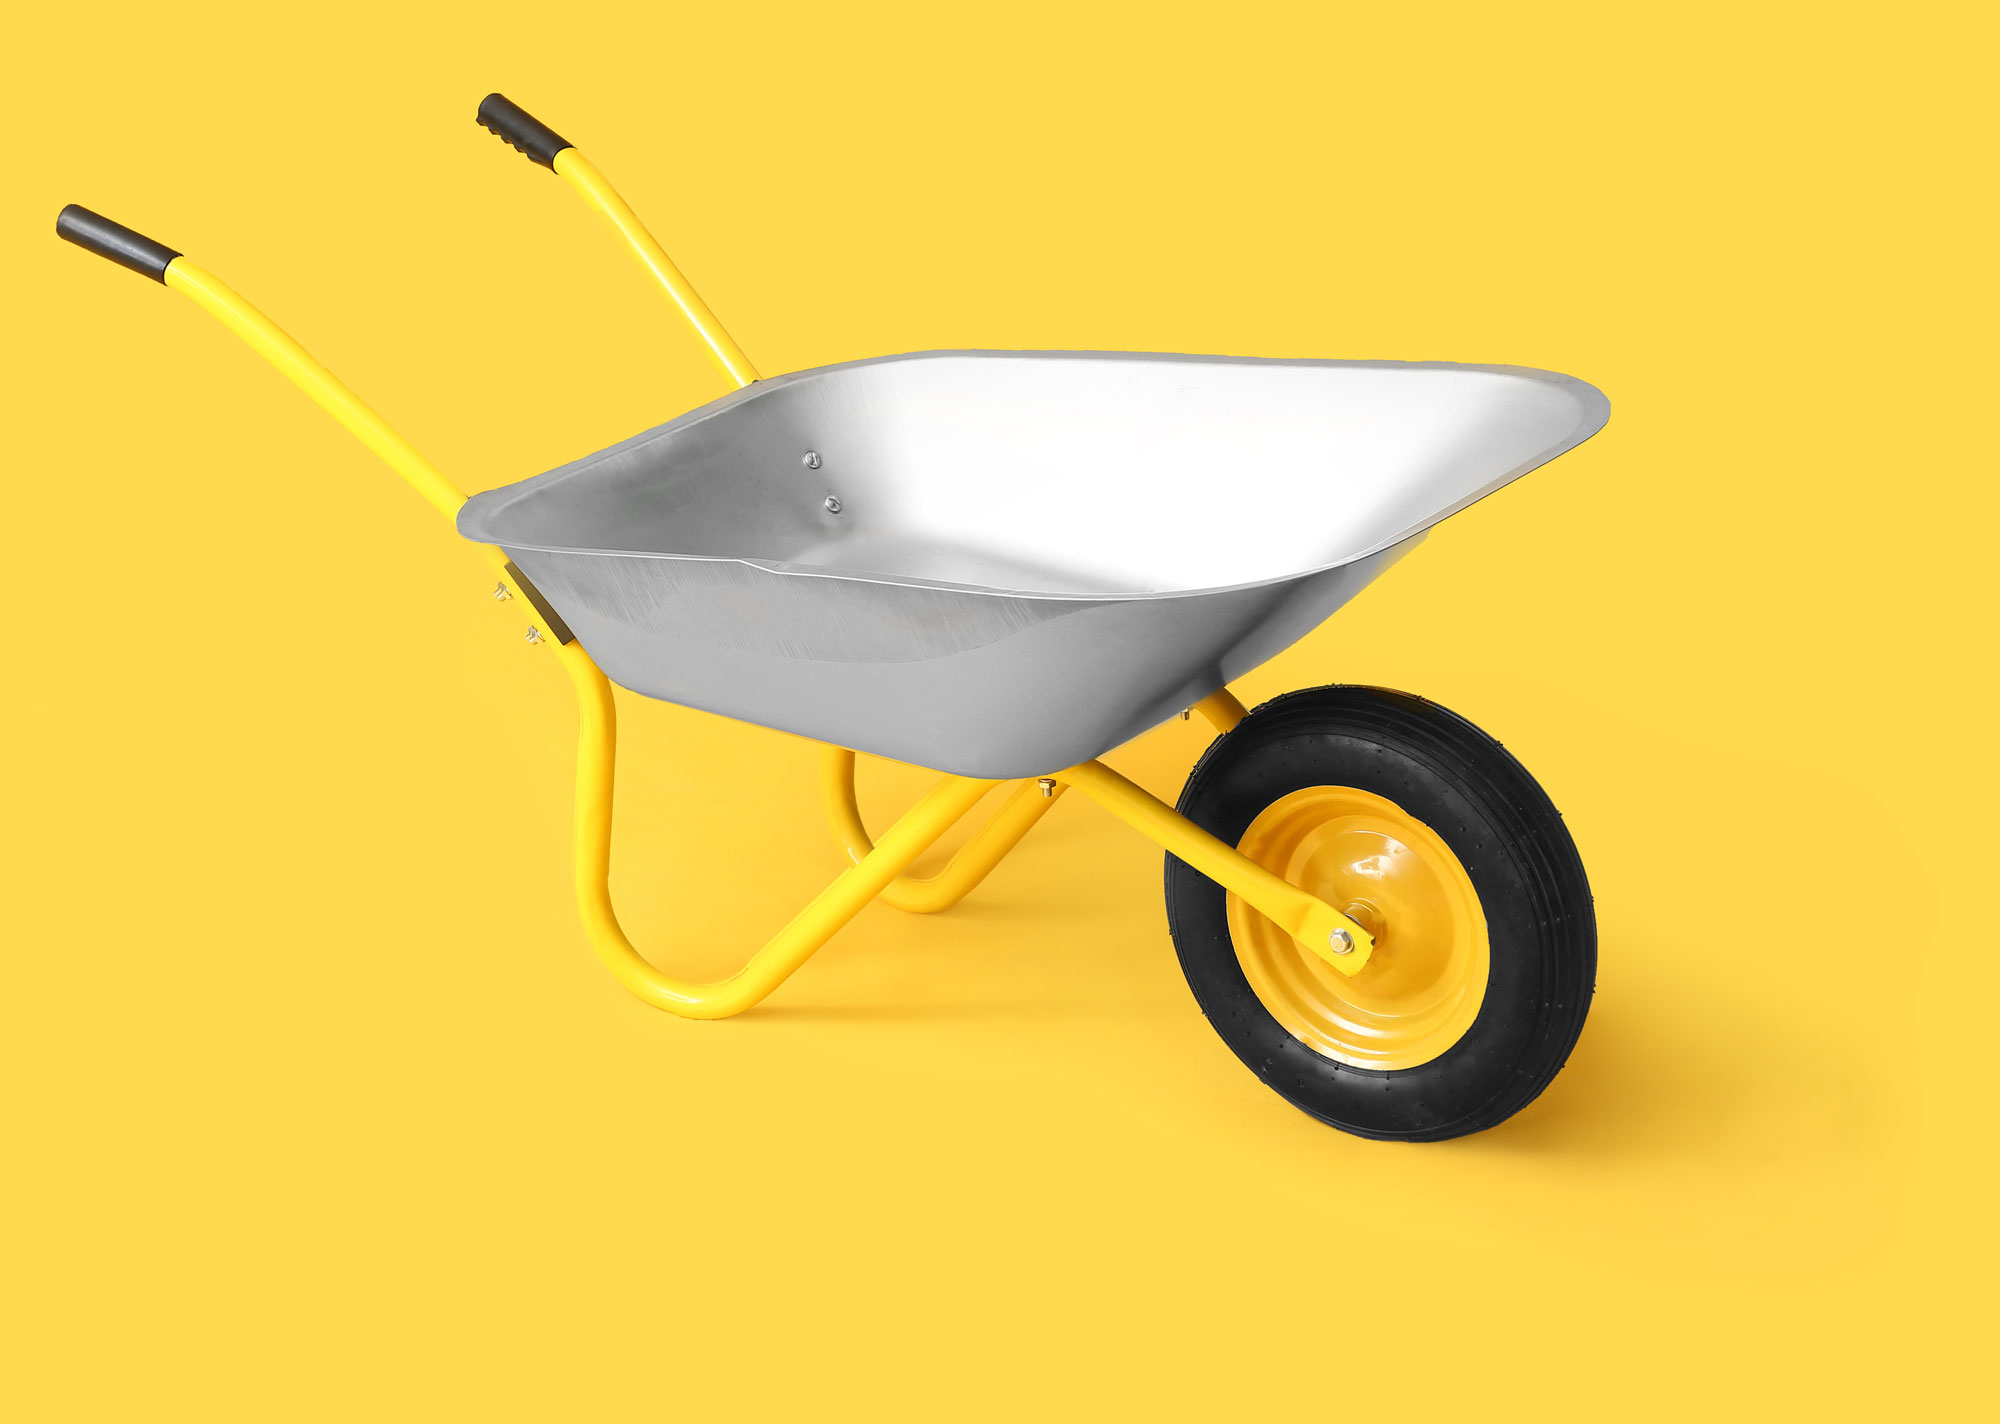 A wheelbarrow with yellow handles sits on a yellow backdrop